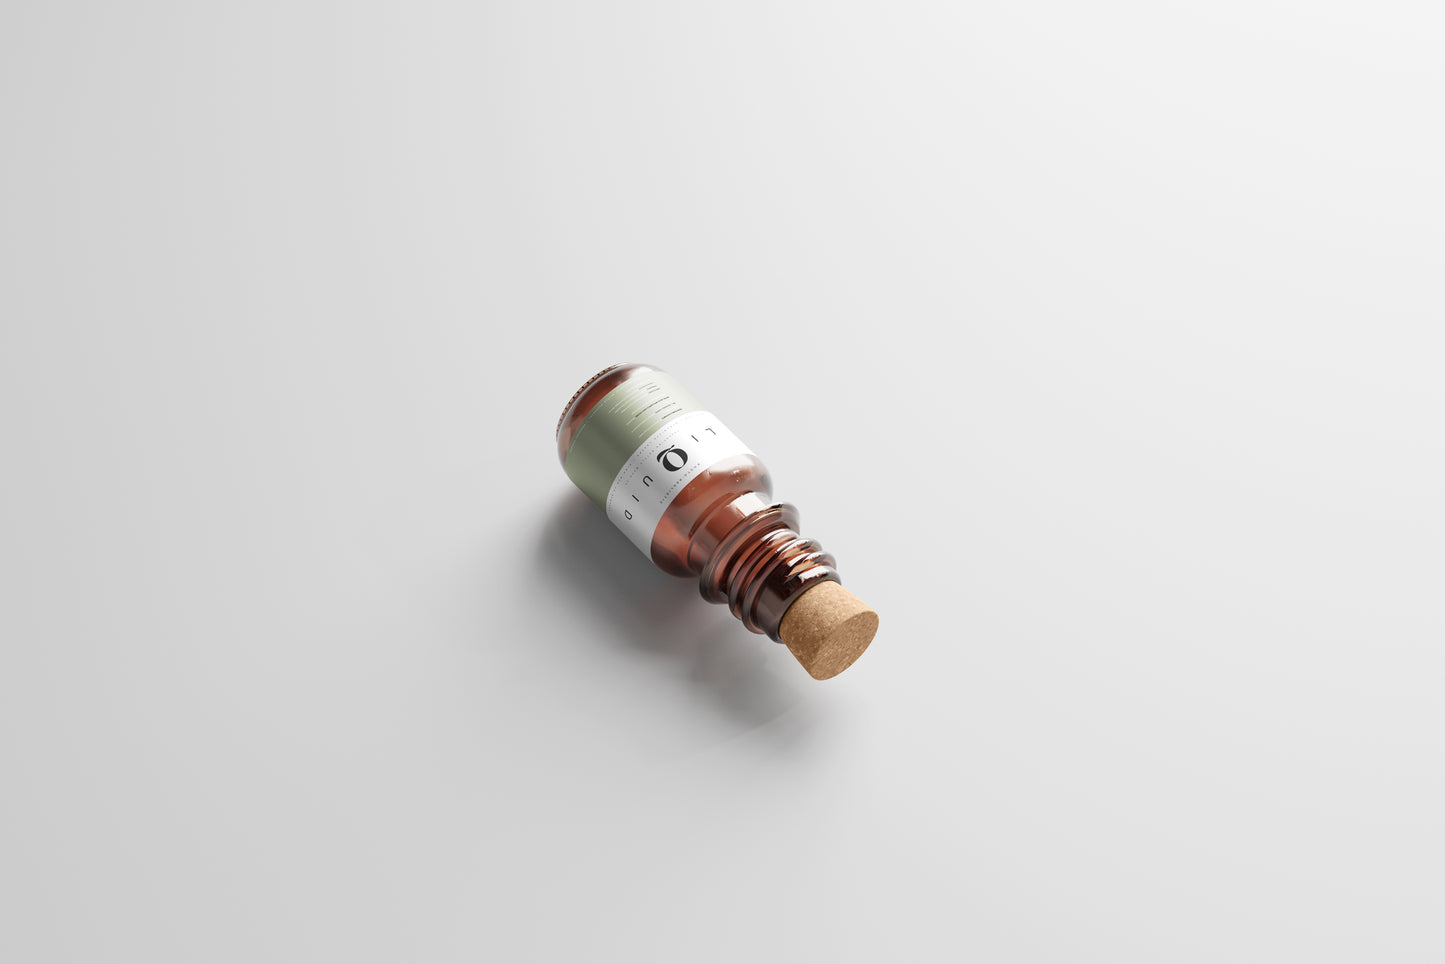 Amber Glass Bottle With Cork Mockup